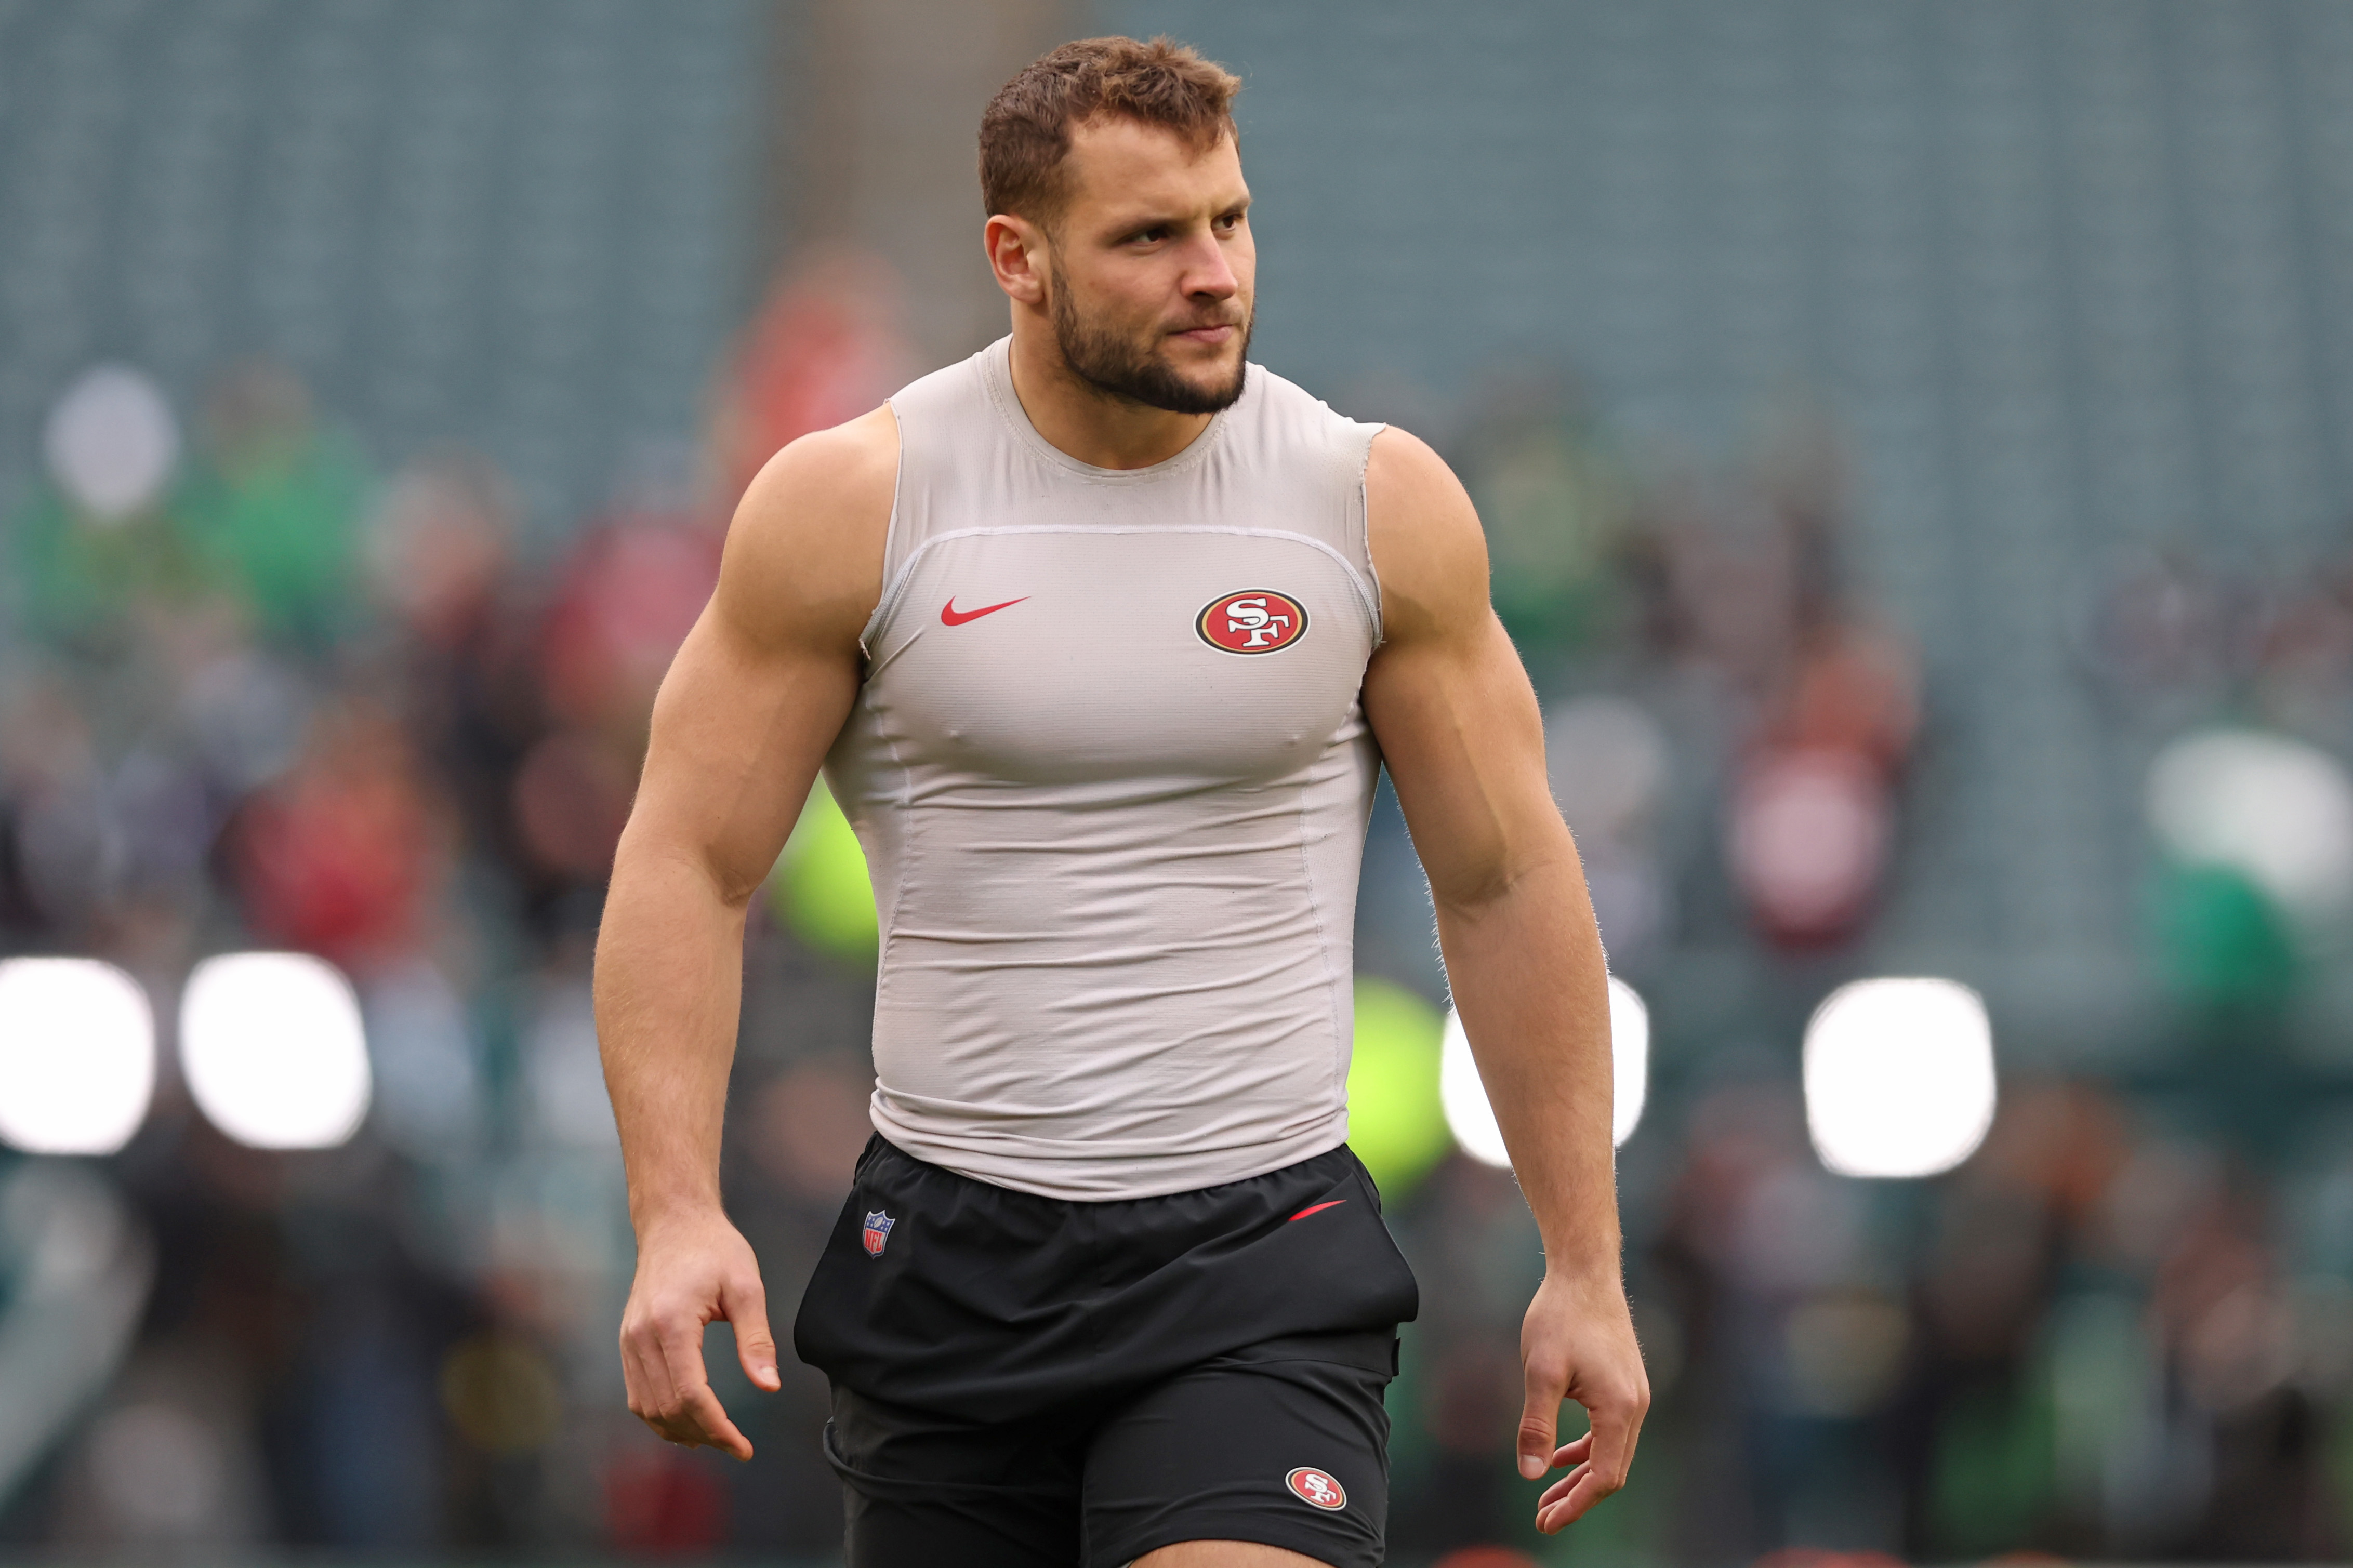 Several teams attempted to trade for Nick Bosa before San Francisco 49ers star signed extension